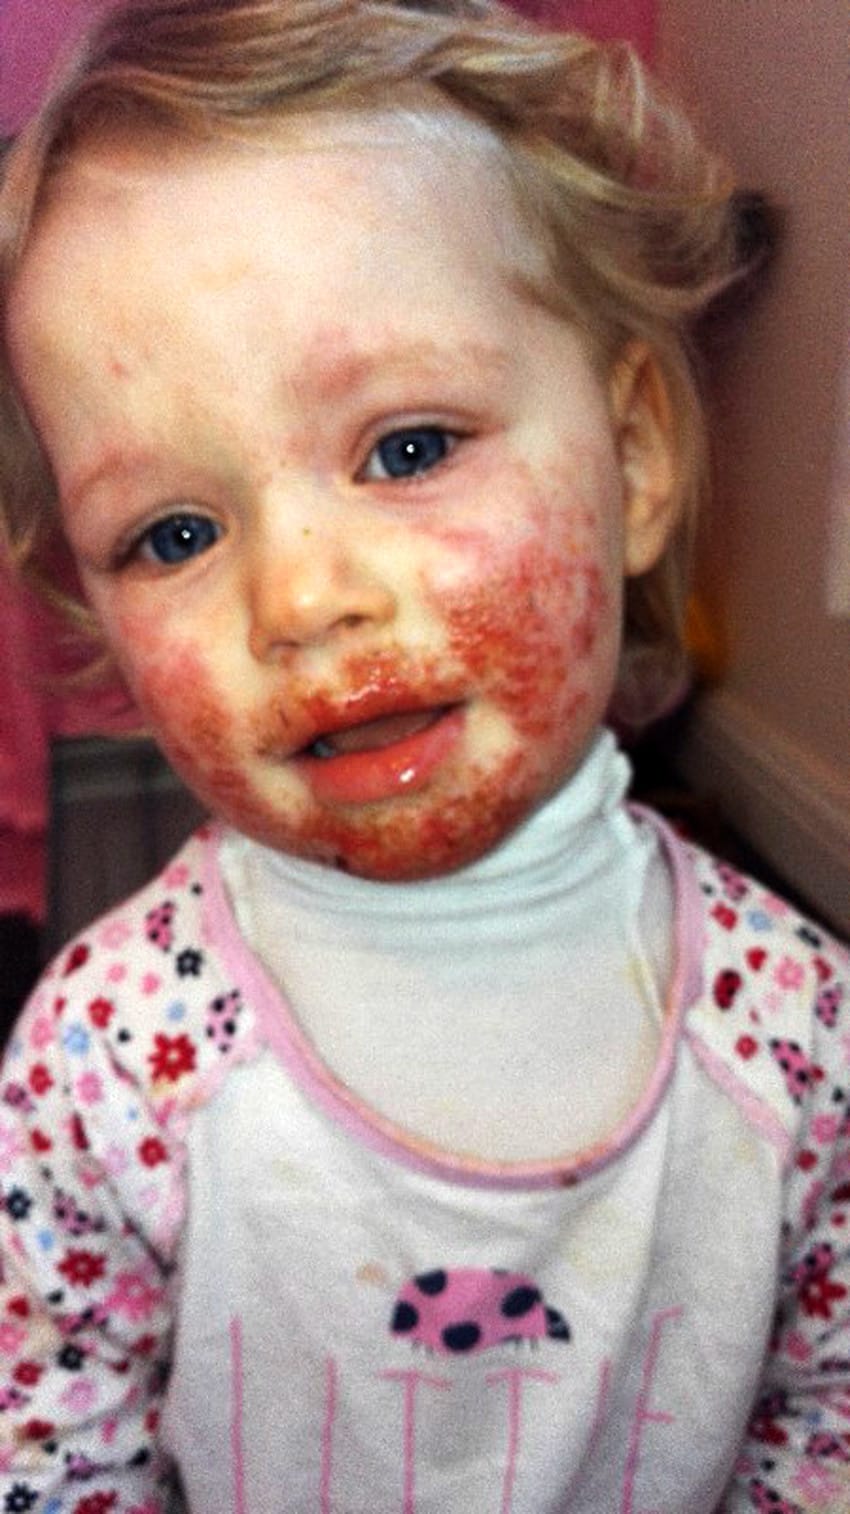 CHILD WITH HERPES ON FACE